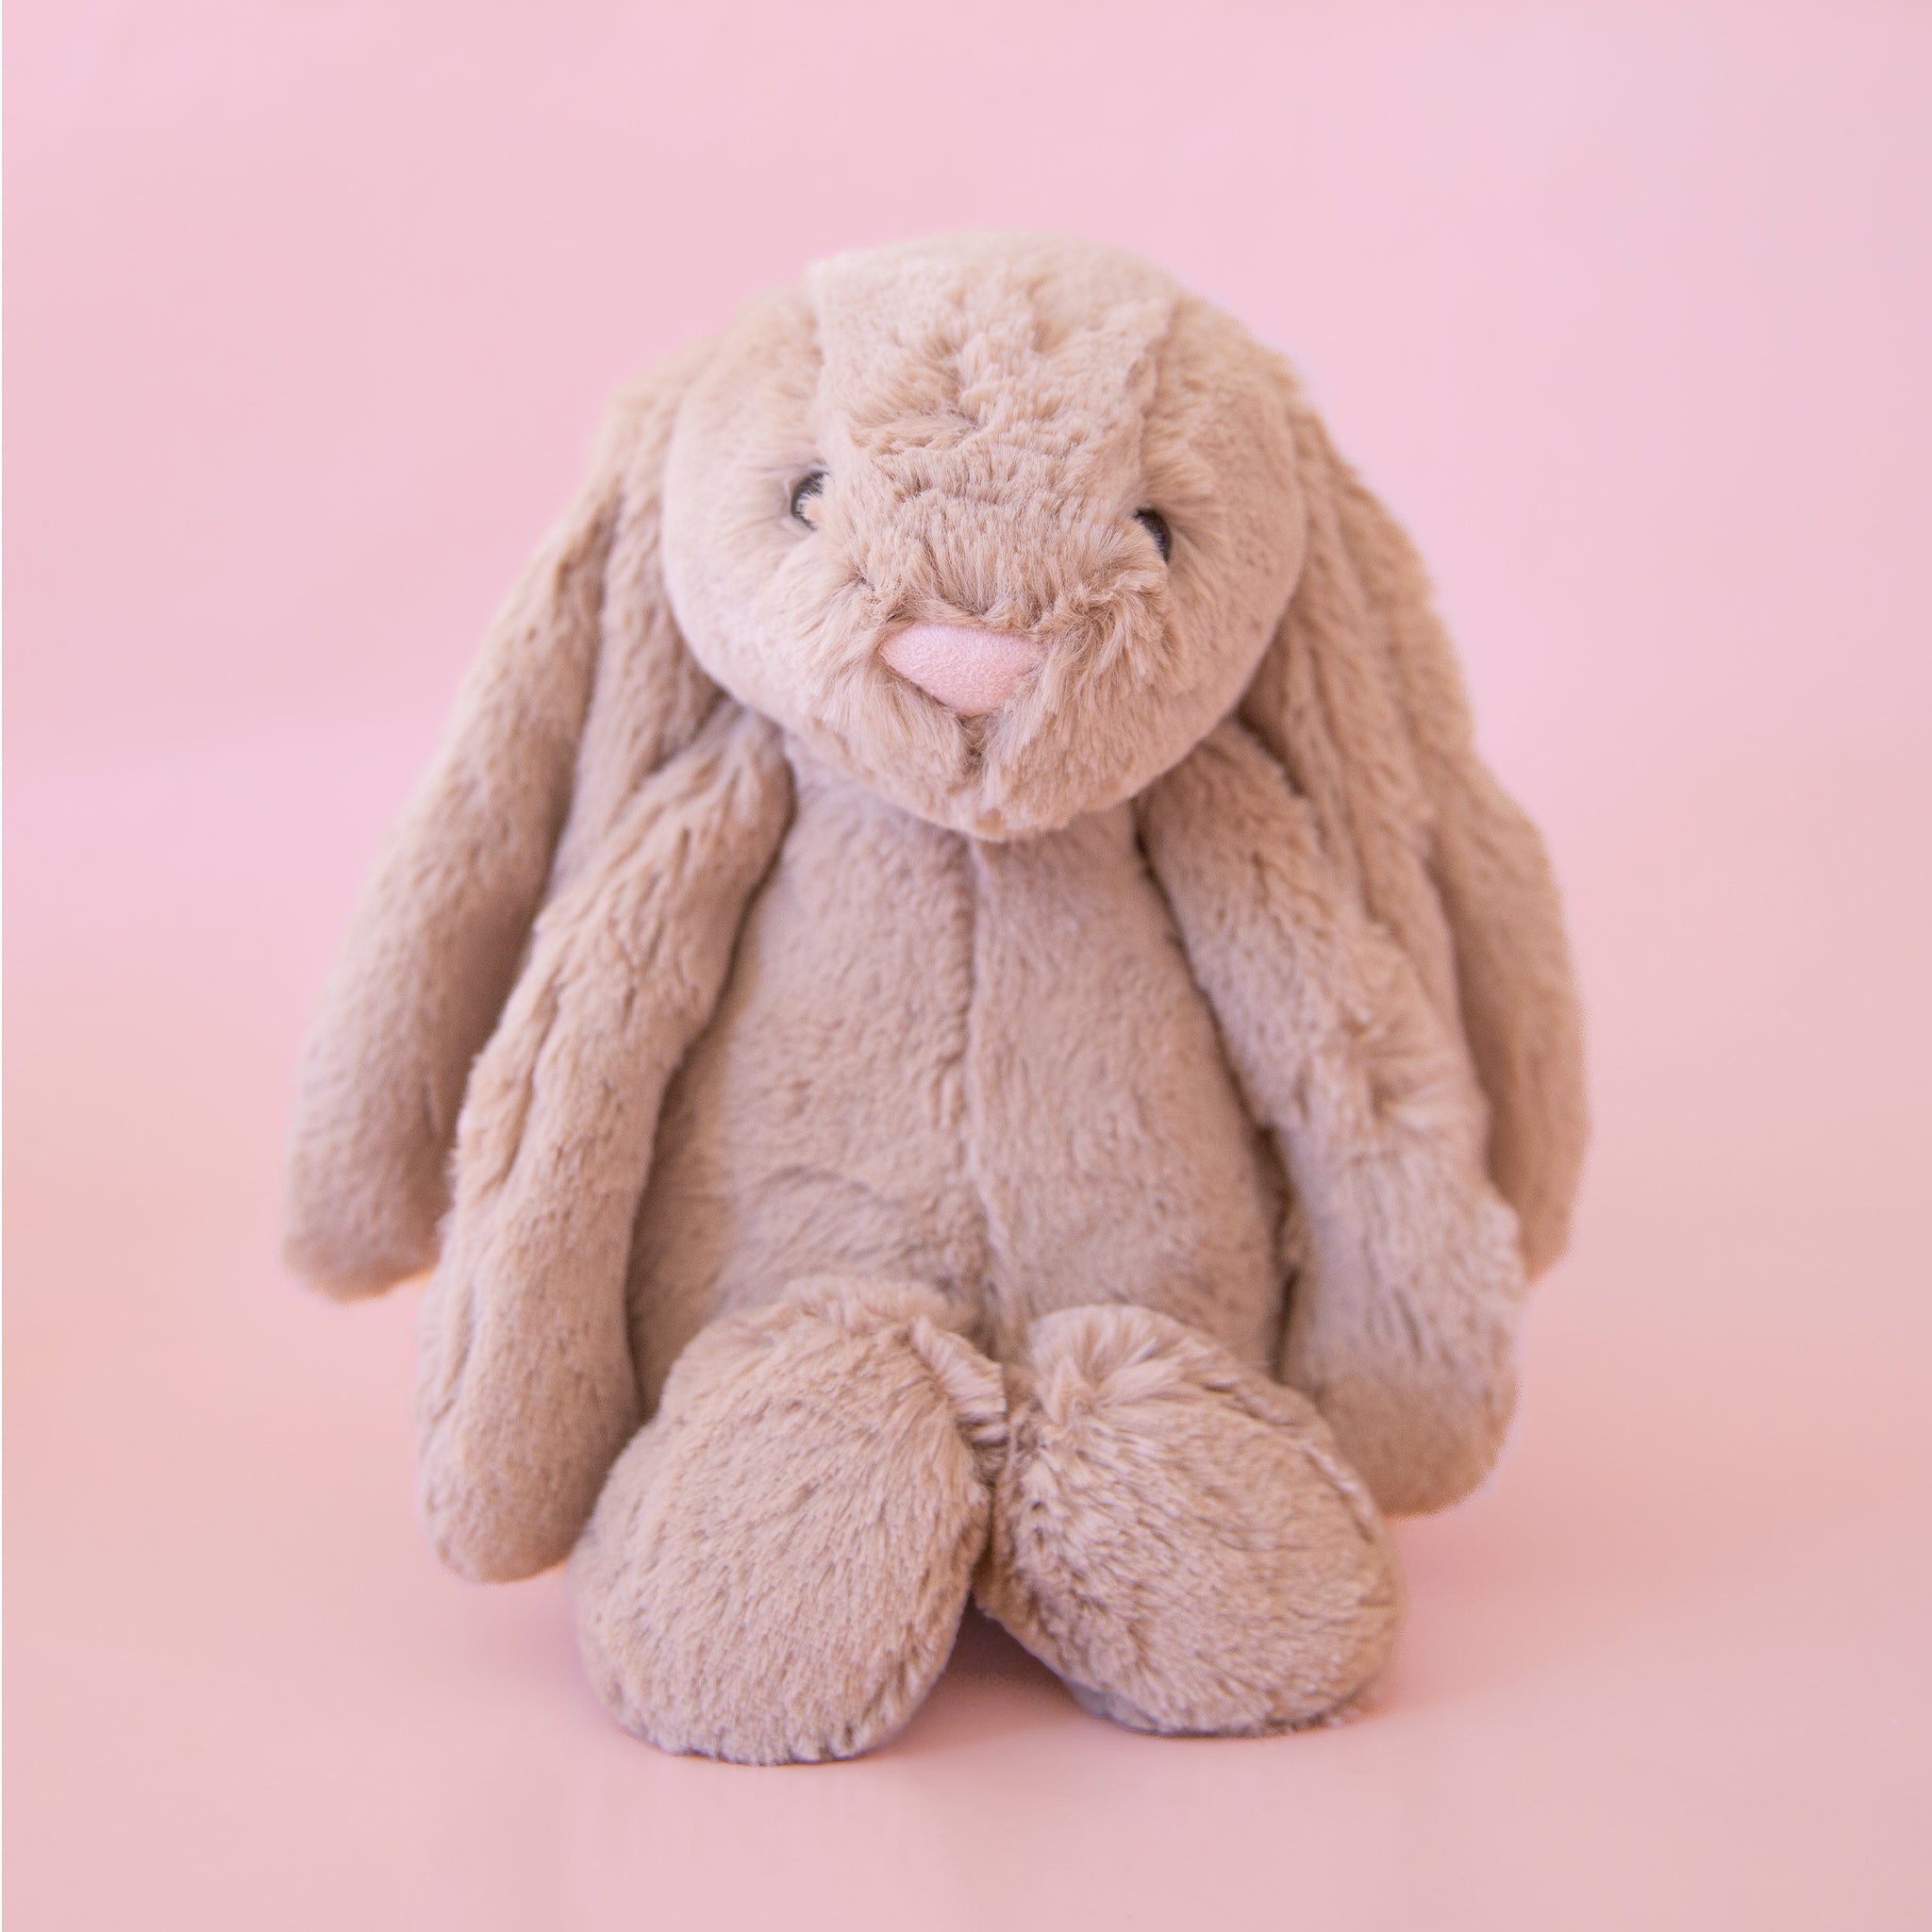 Soft stuffed animal in the shape of a beige-grey colored rabbit, with long floppy ears, arms and legs.